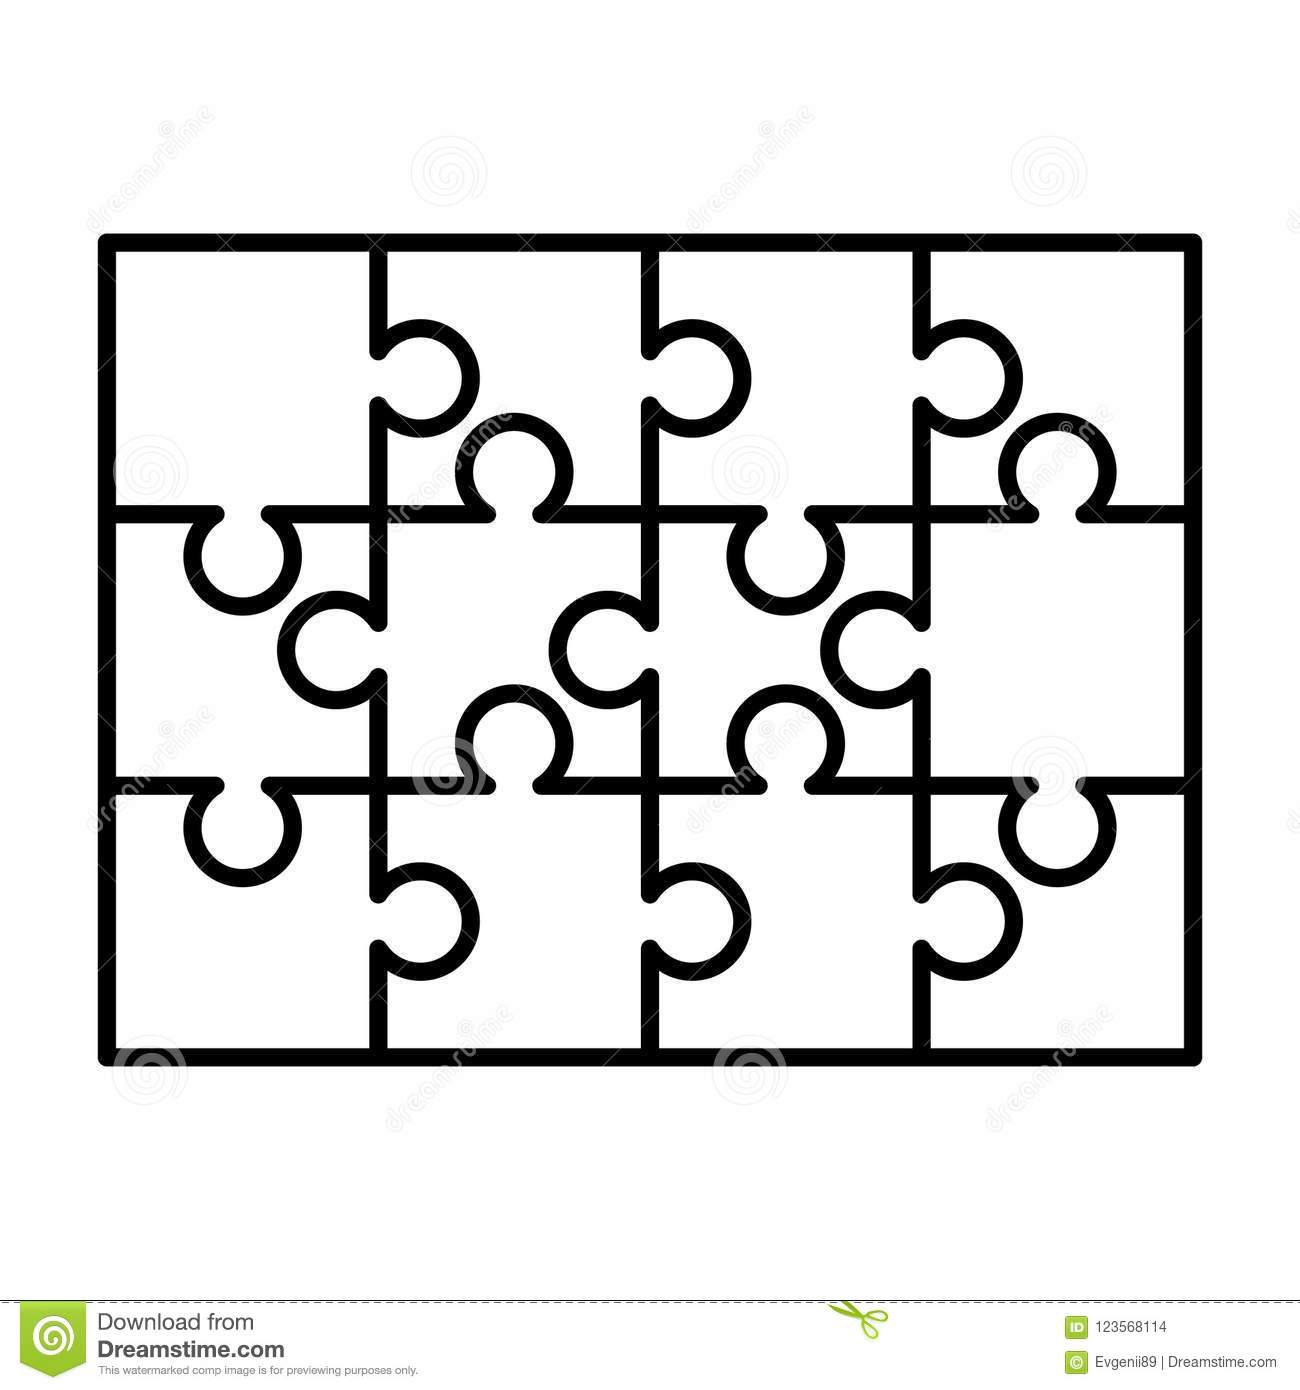 12 White Puzzles Pieces Arranged In A Rectangle Shape. Jigsaw Puzzle - Print Jigsaw Puzzle